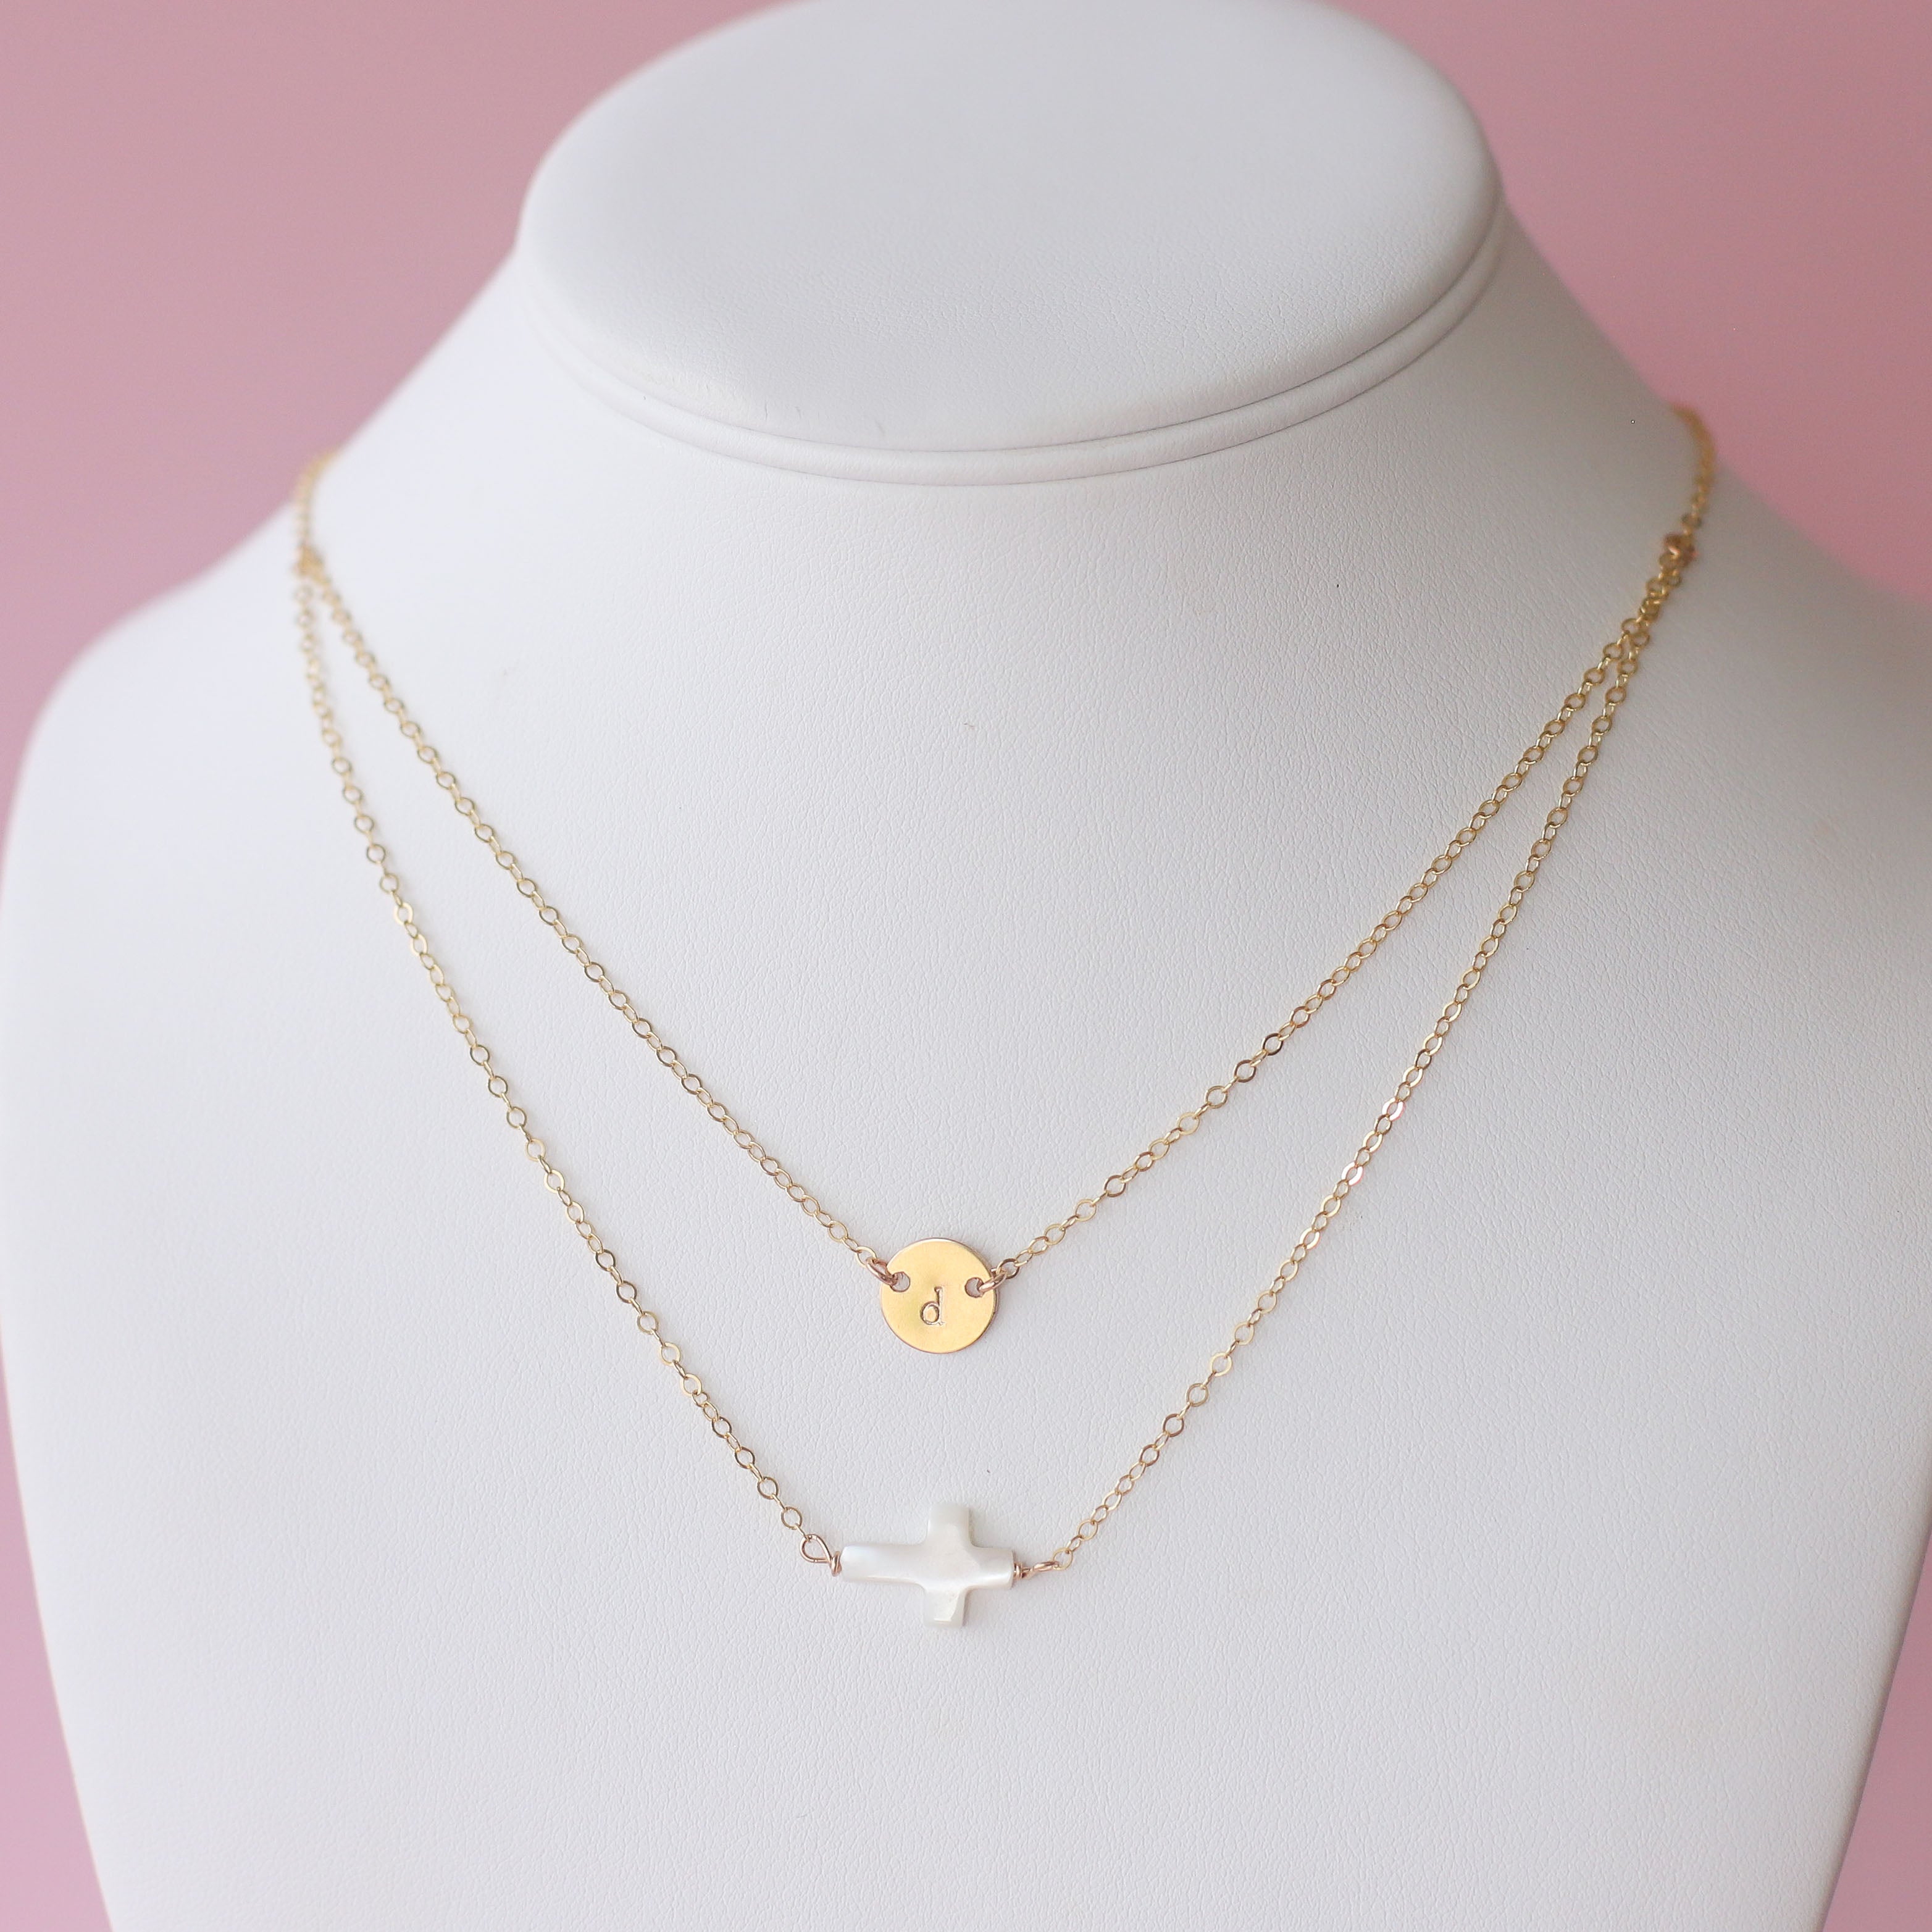 14K Gold Plated Layered Initial Initial Necklace With Cute Diamond Letter  Pendant Perfect Gift For Women And Girls From Damai999, $4.83 | DHgate.Com